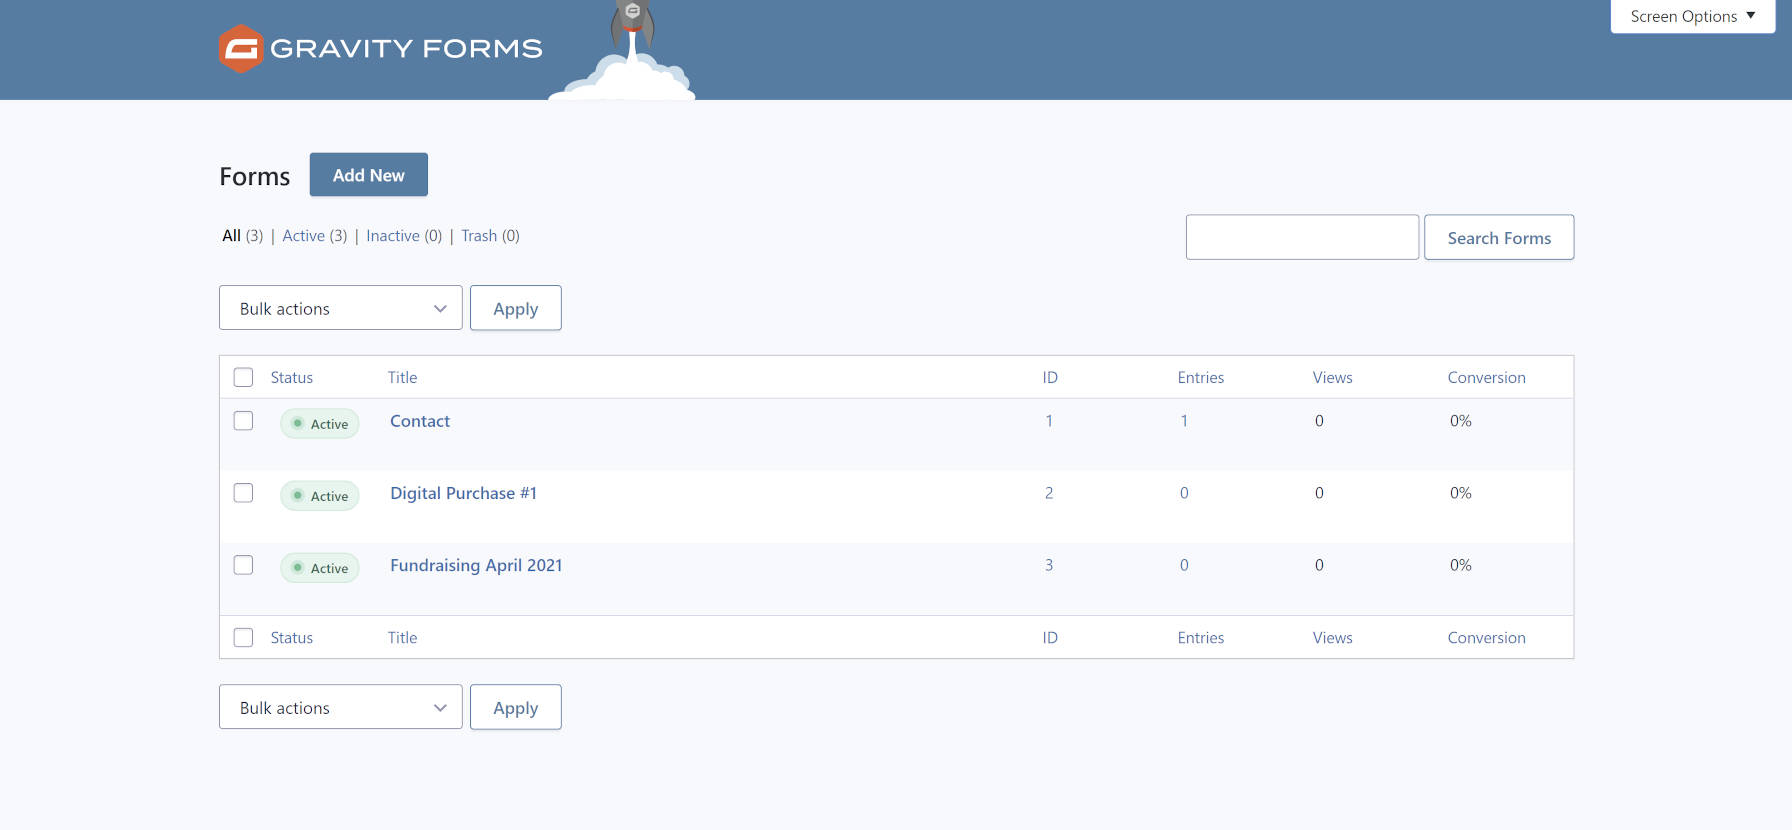 Branded forms management screen from the Gravity Forms WordPress plugin.